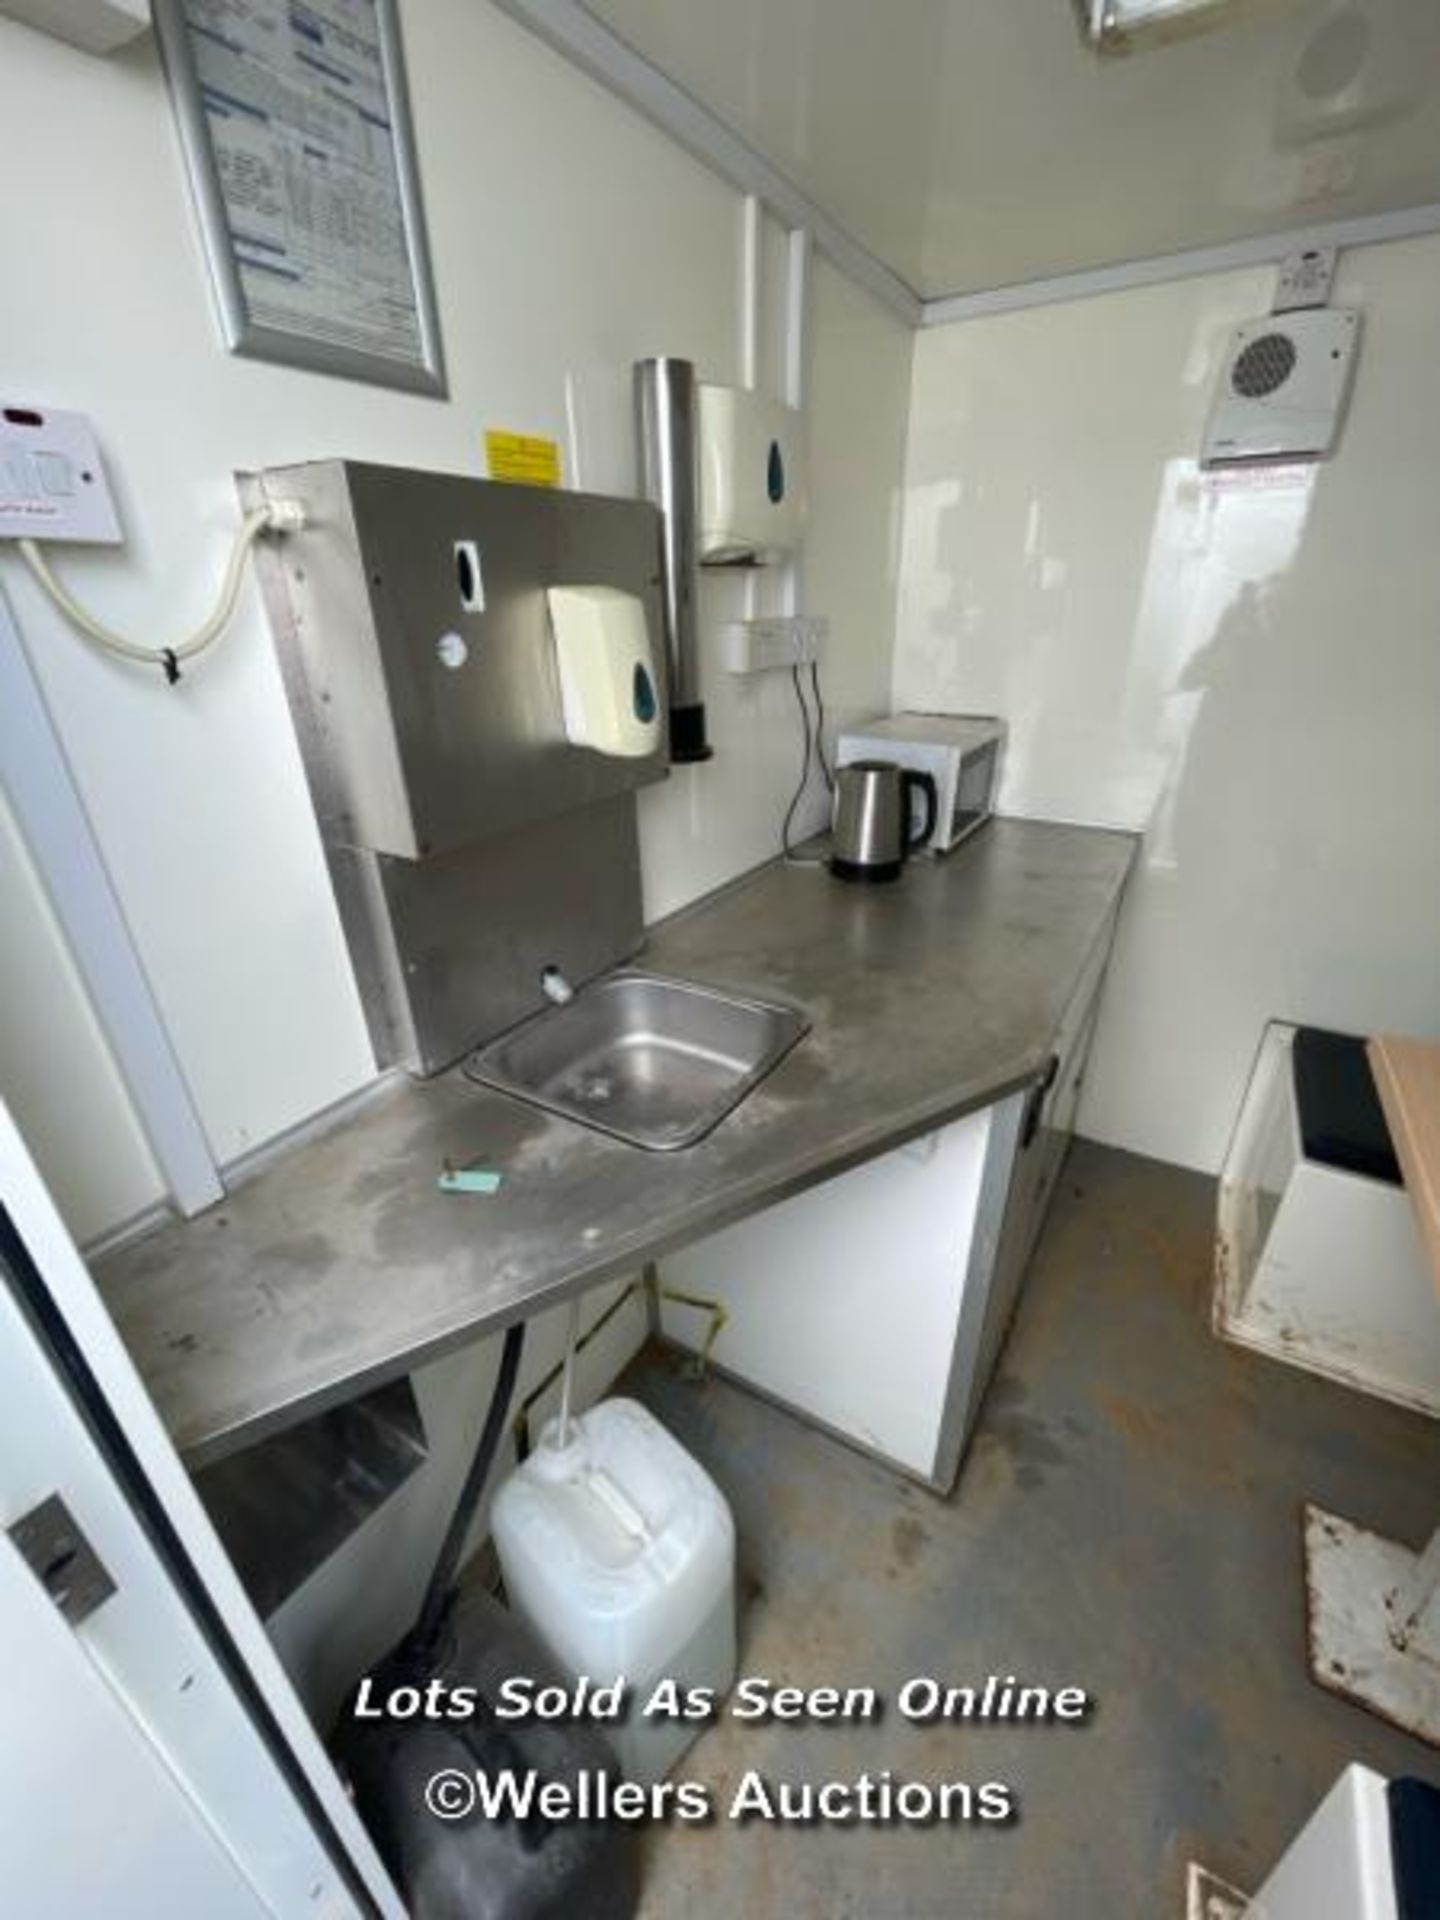 6 PERSON 12 X 7.5FT AJC EASY CABIN TOWABLE WELFARE UNIT, INCLUDES WASH BASIN, KETTLE, MICROWAVE, - Image 9 of 19